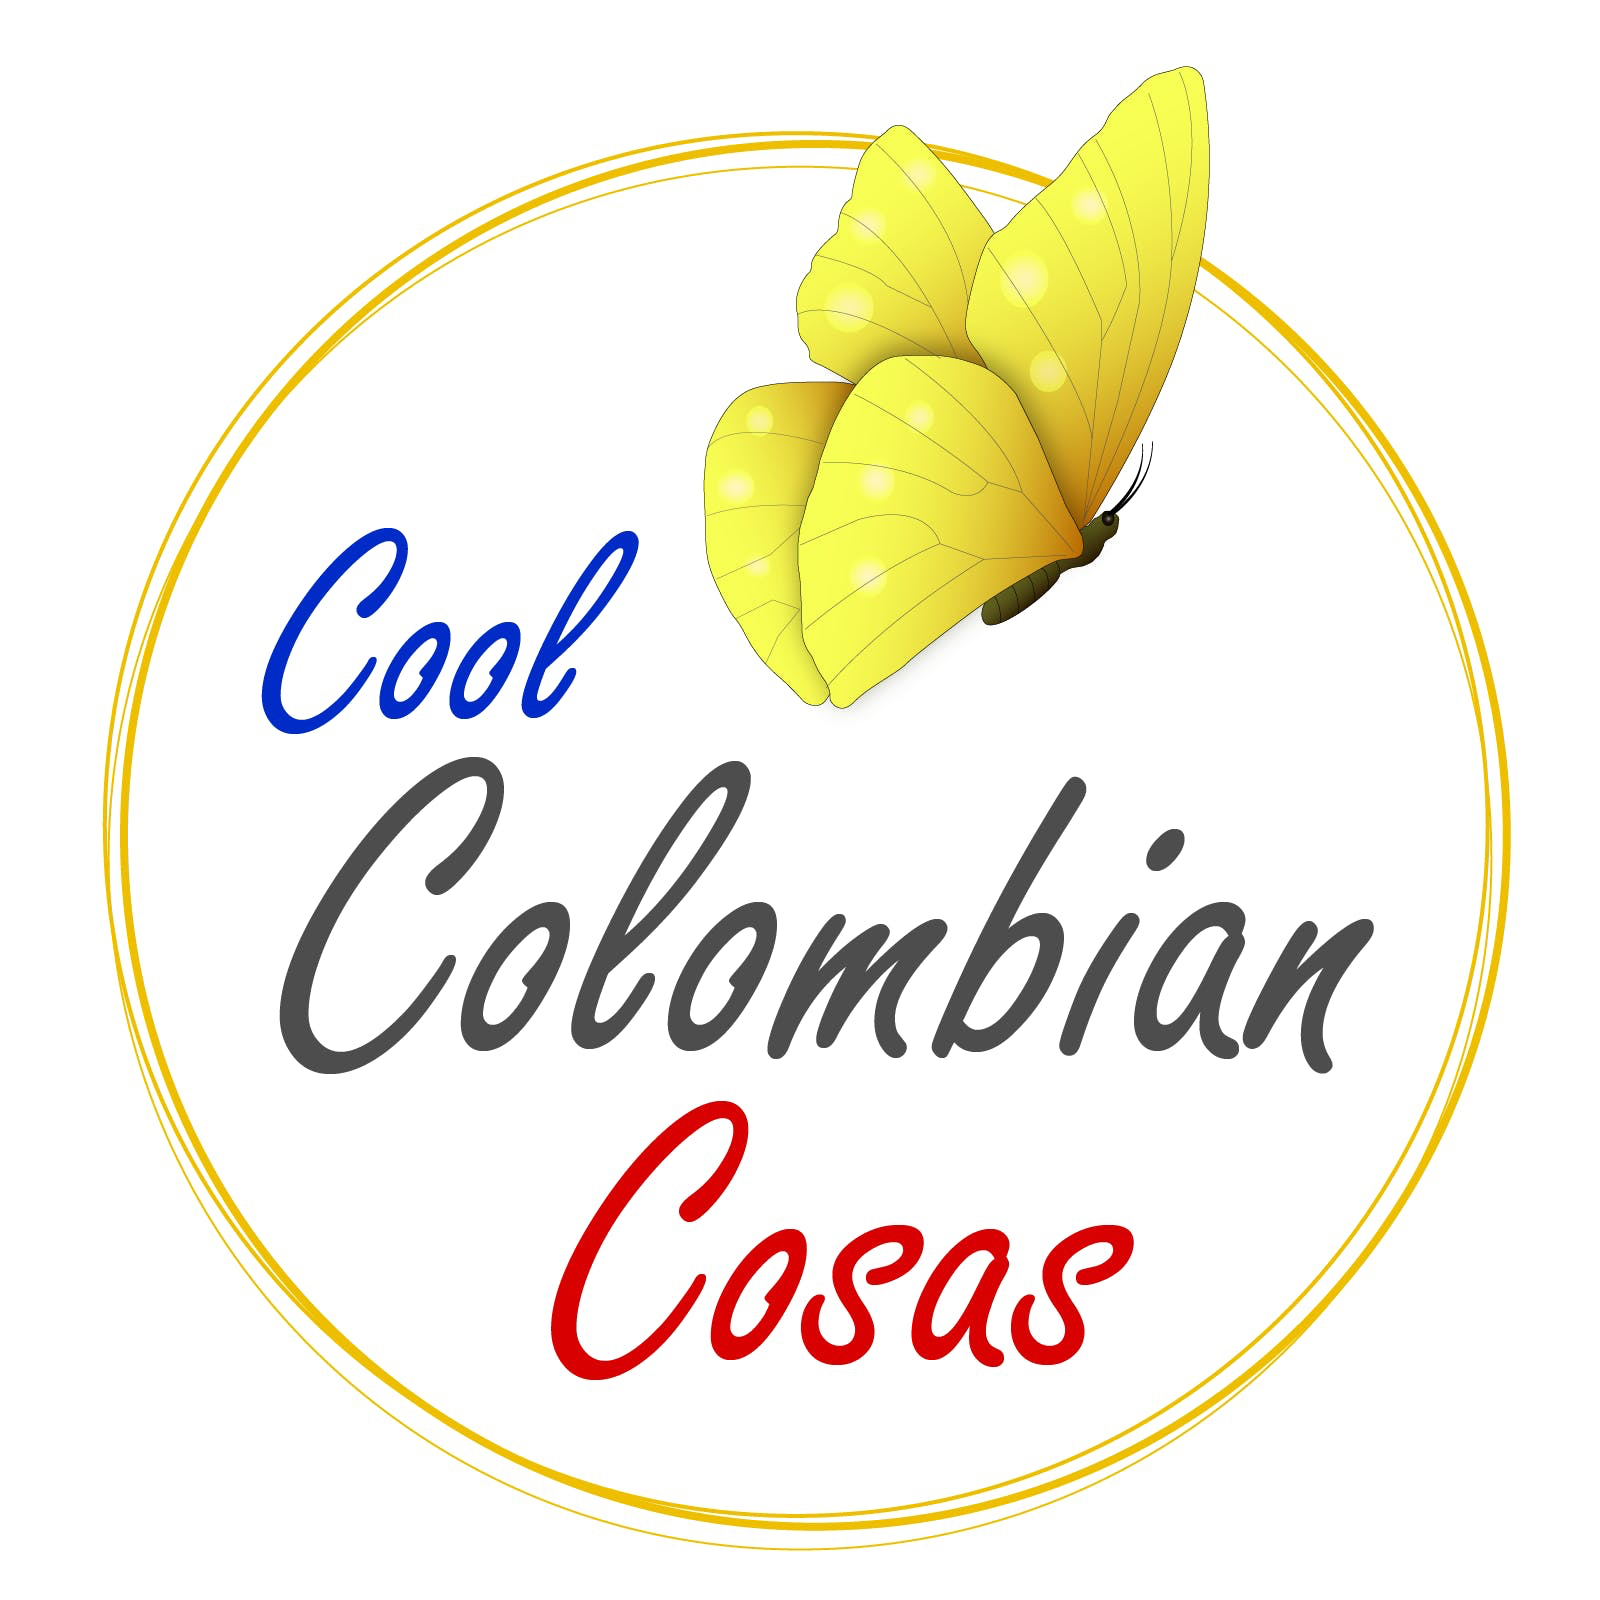 Cool Colombian Cosas